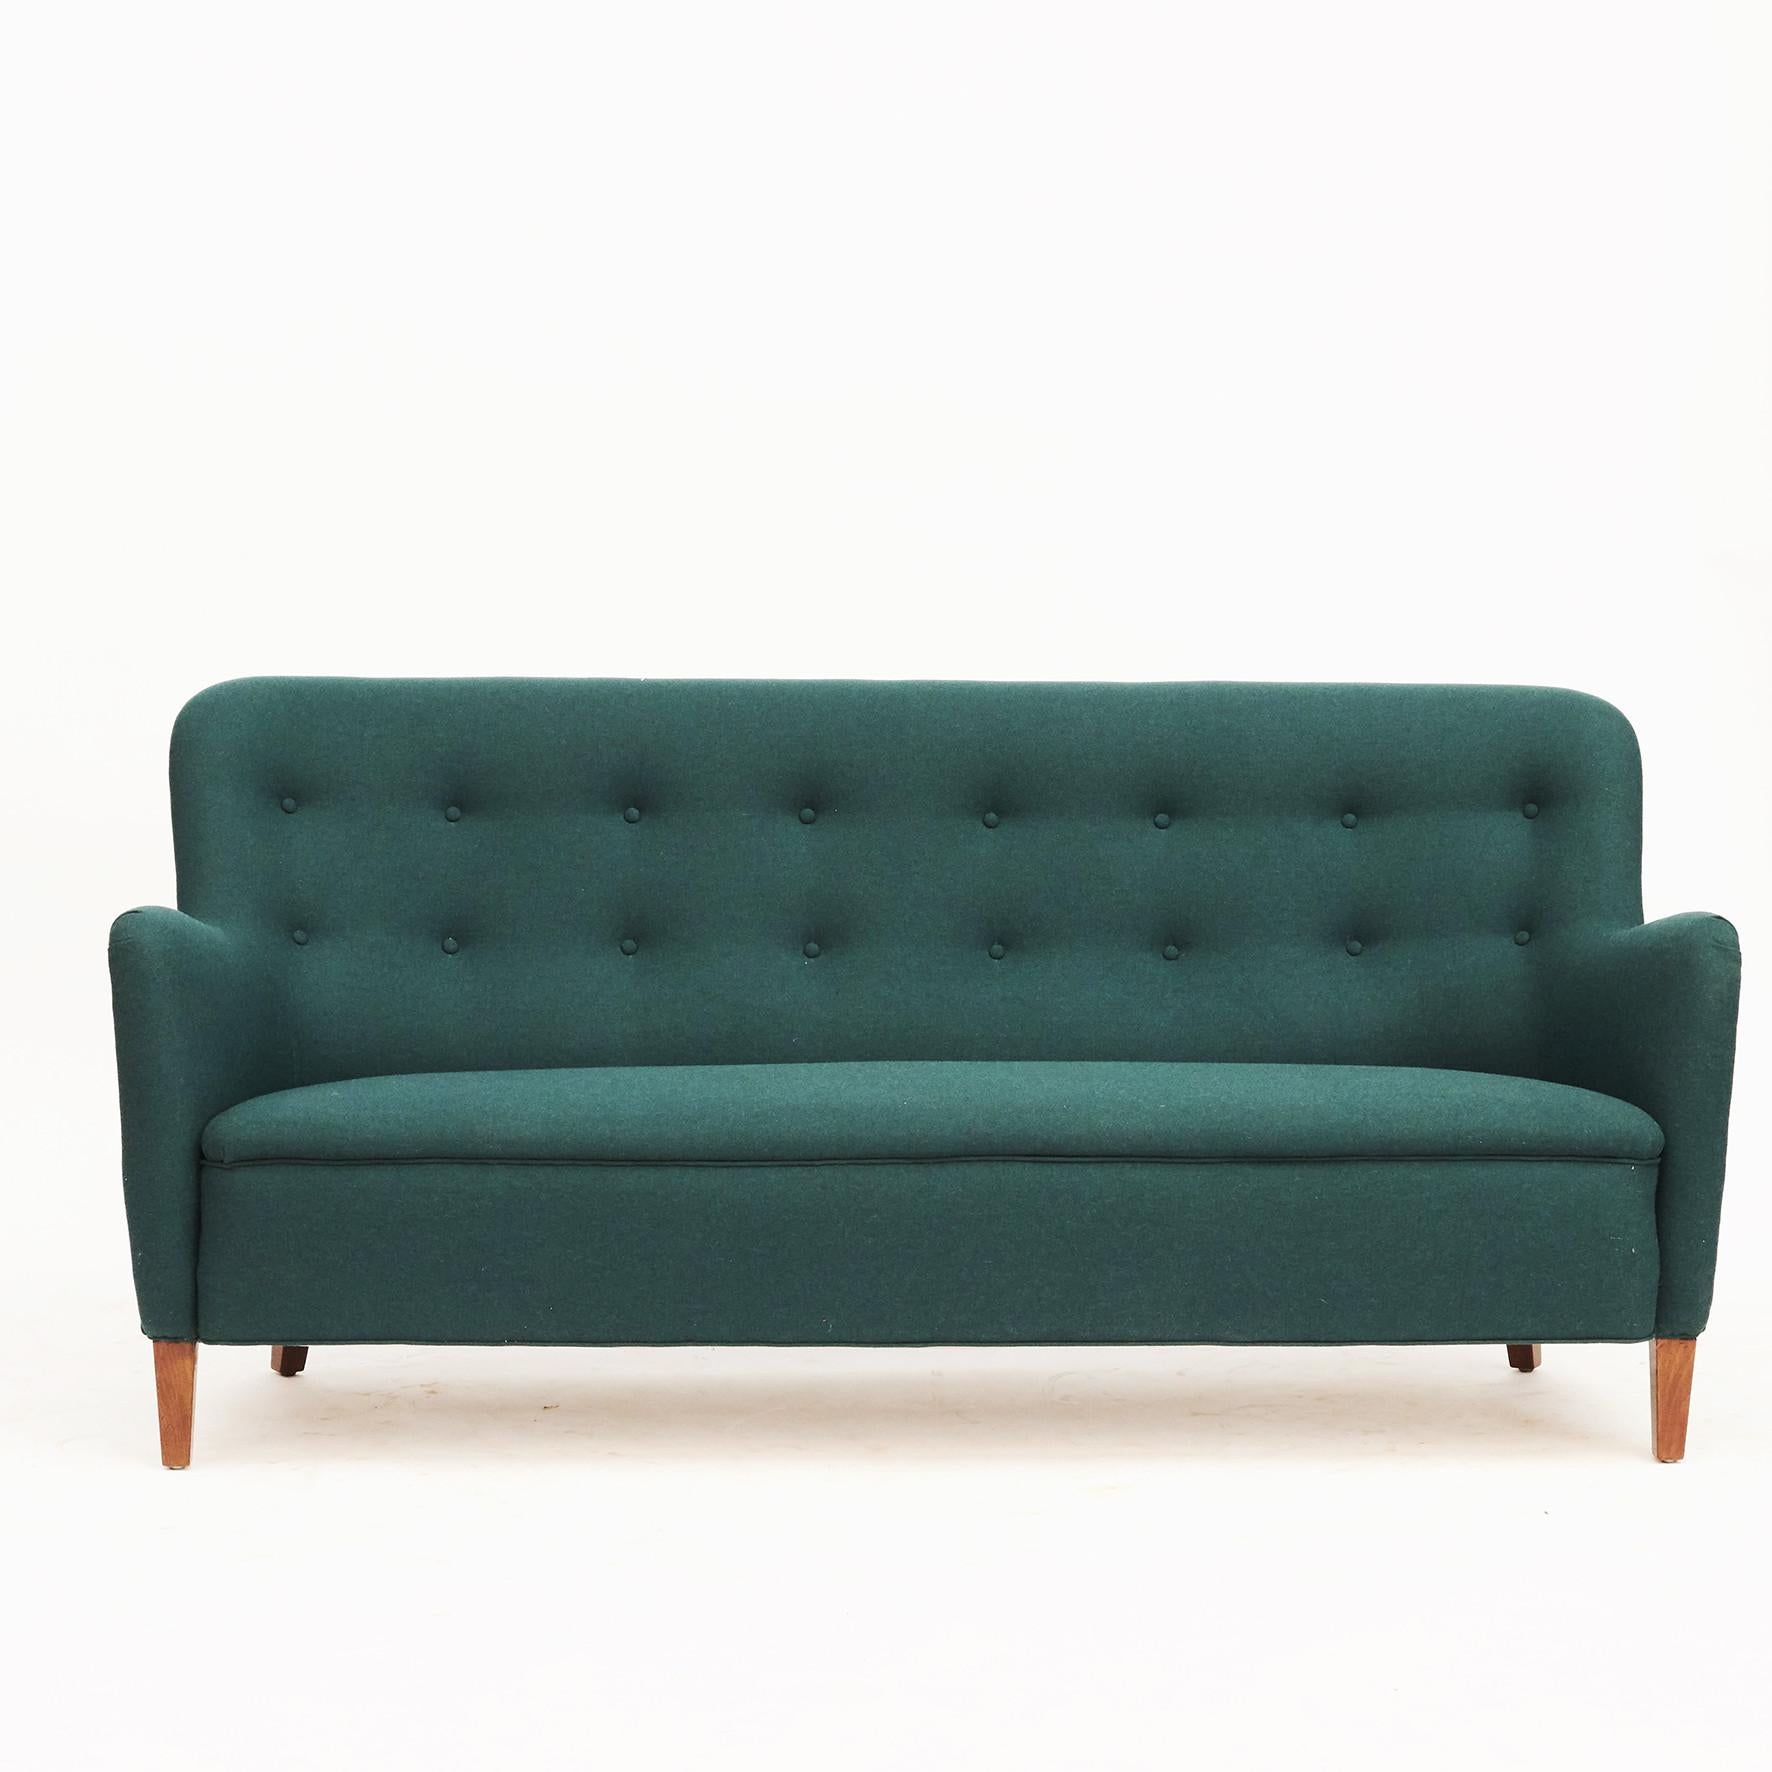 A living room set including a three-seat freestanding sofa and two easy chairs. Designed by Birte Iversen, Denmark, circa 1940-1950.
Cabinetmaker A.J. Iversen, Denmark.

Newly upholstered with wool in deep green from Nobilis.
Sold as a set (3